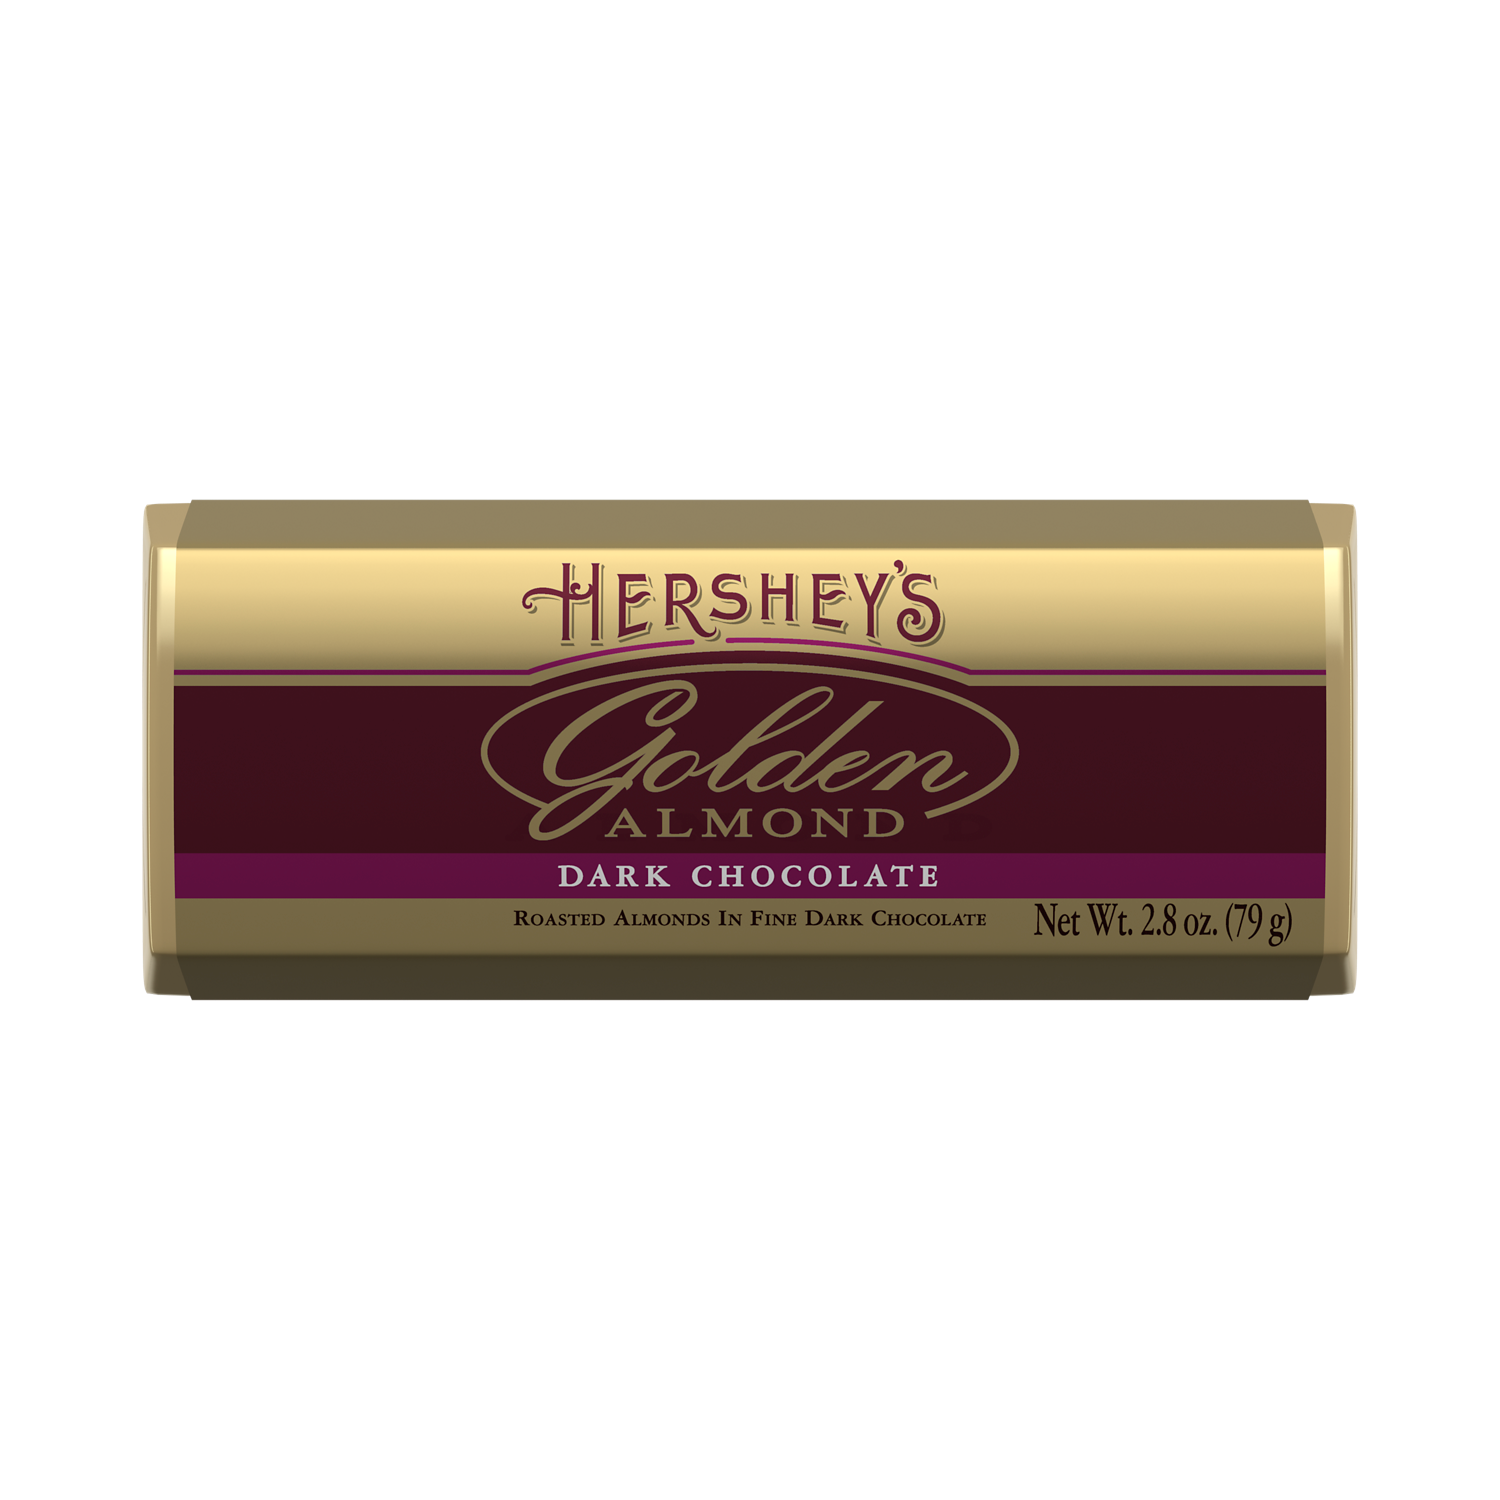 HERSHEY'S GOLDEN ALMOND Dark Chocolate Candy Bars, 2.8 oz, 5 pack - Front of Package